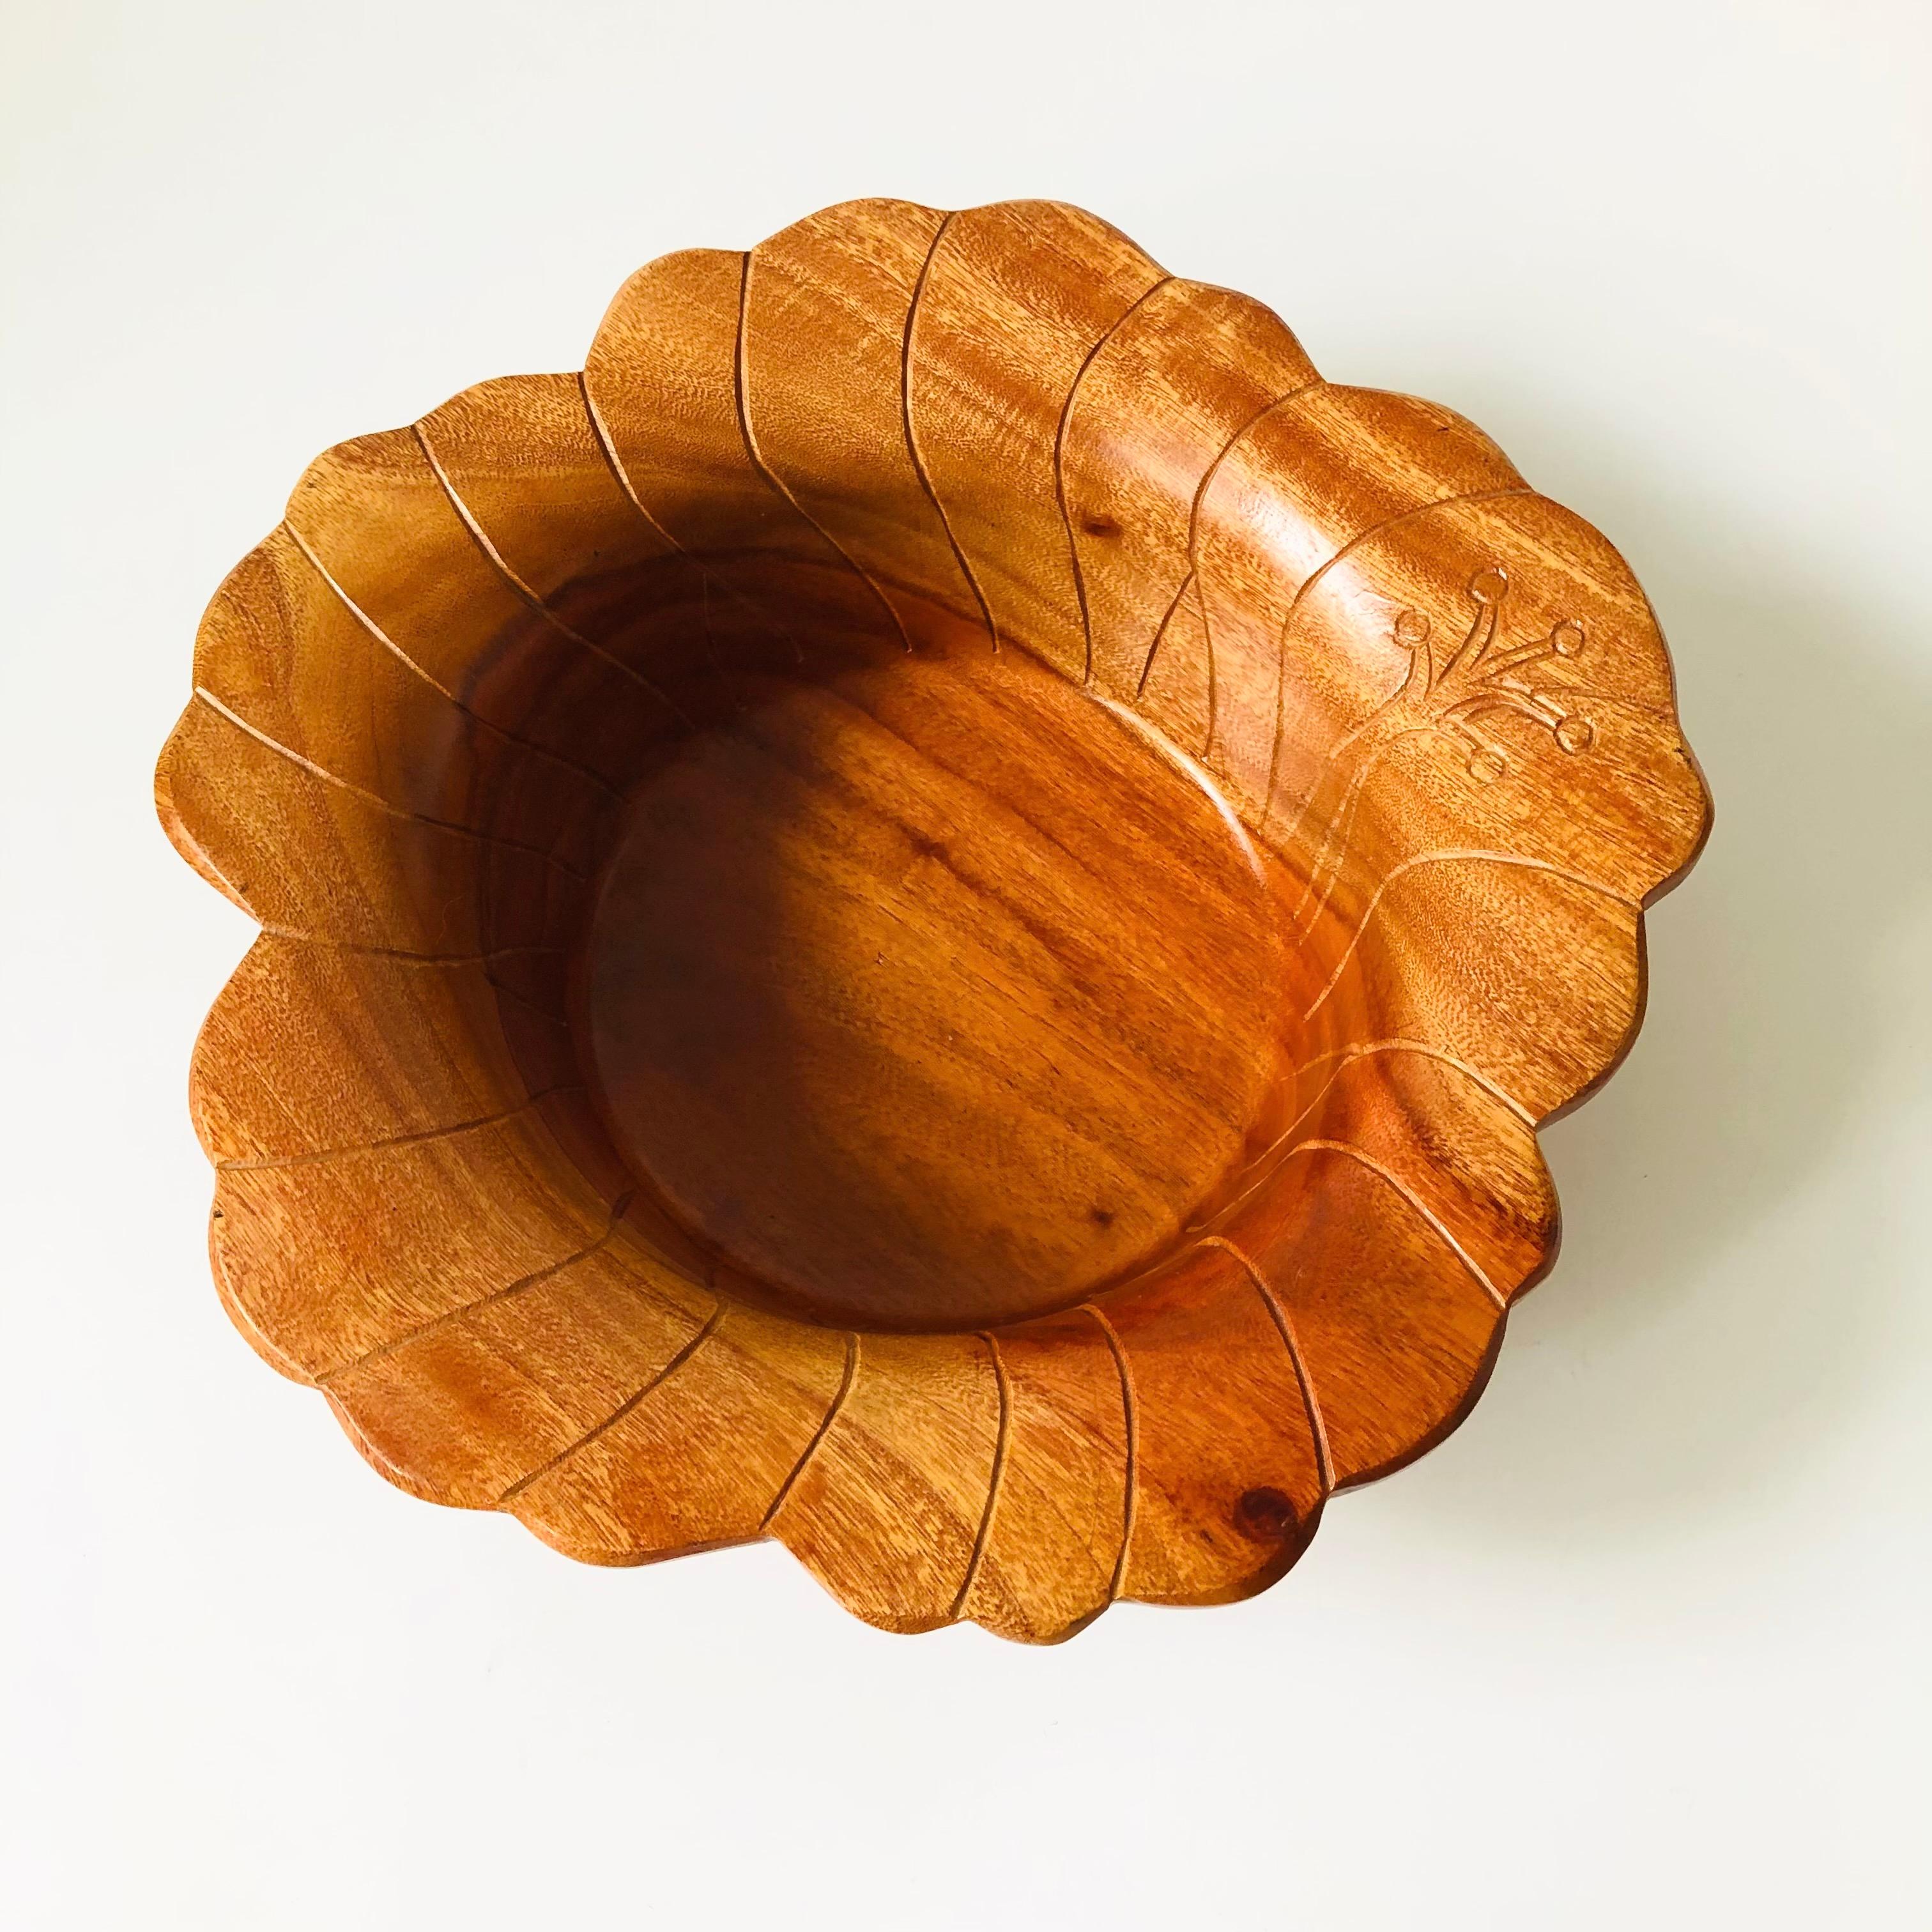 A vintage wood bowl carved into the shape of a flower. Beautiful detailing to the wide rim. Versatile medium size for using as a serving bowl or fruit bowl.

